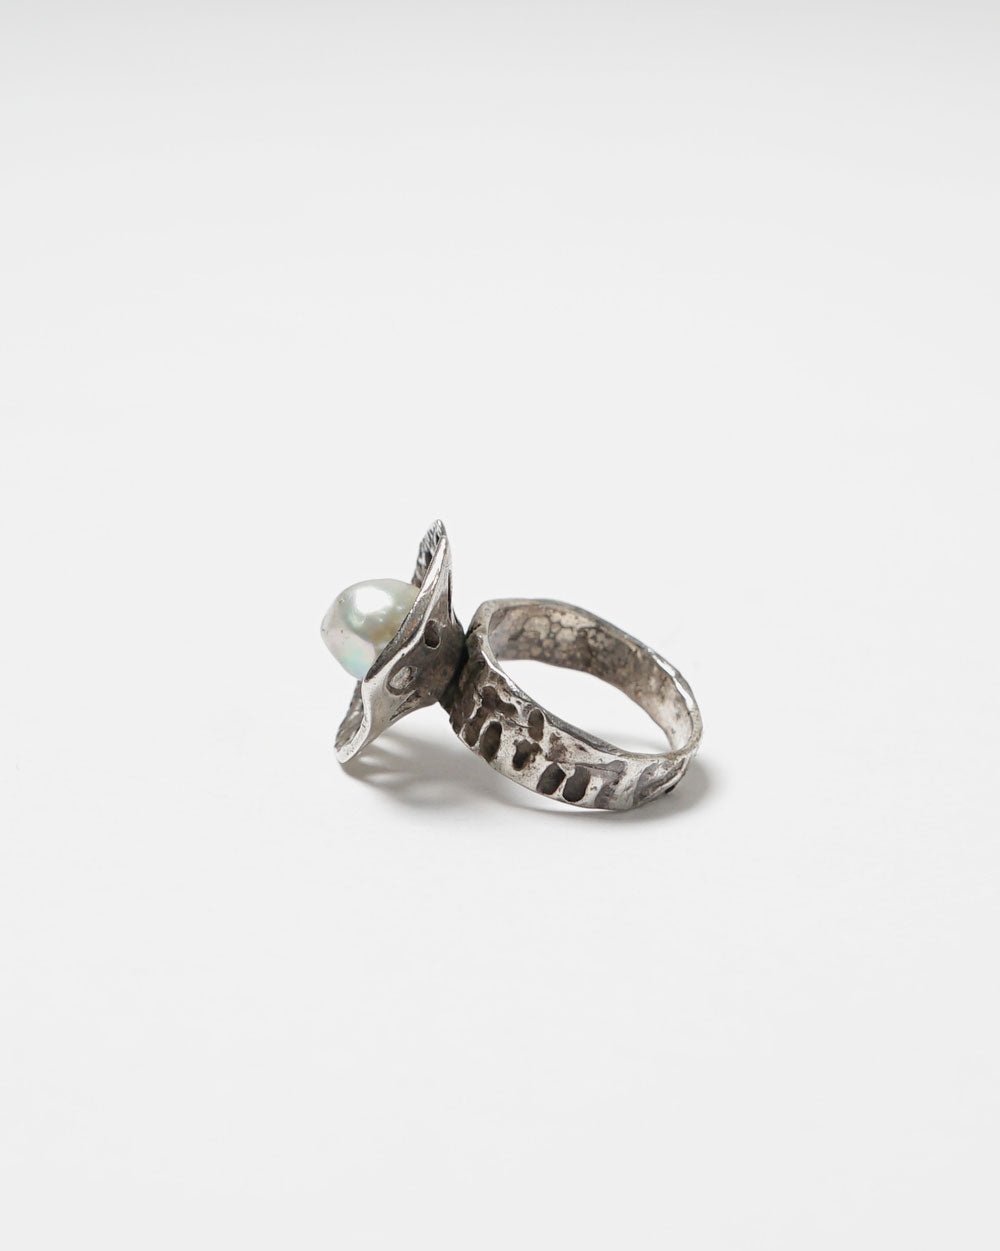 Silver Ring w/ Pearl / size: 9.5